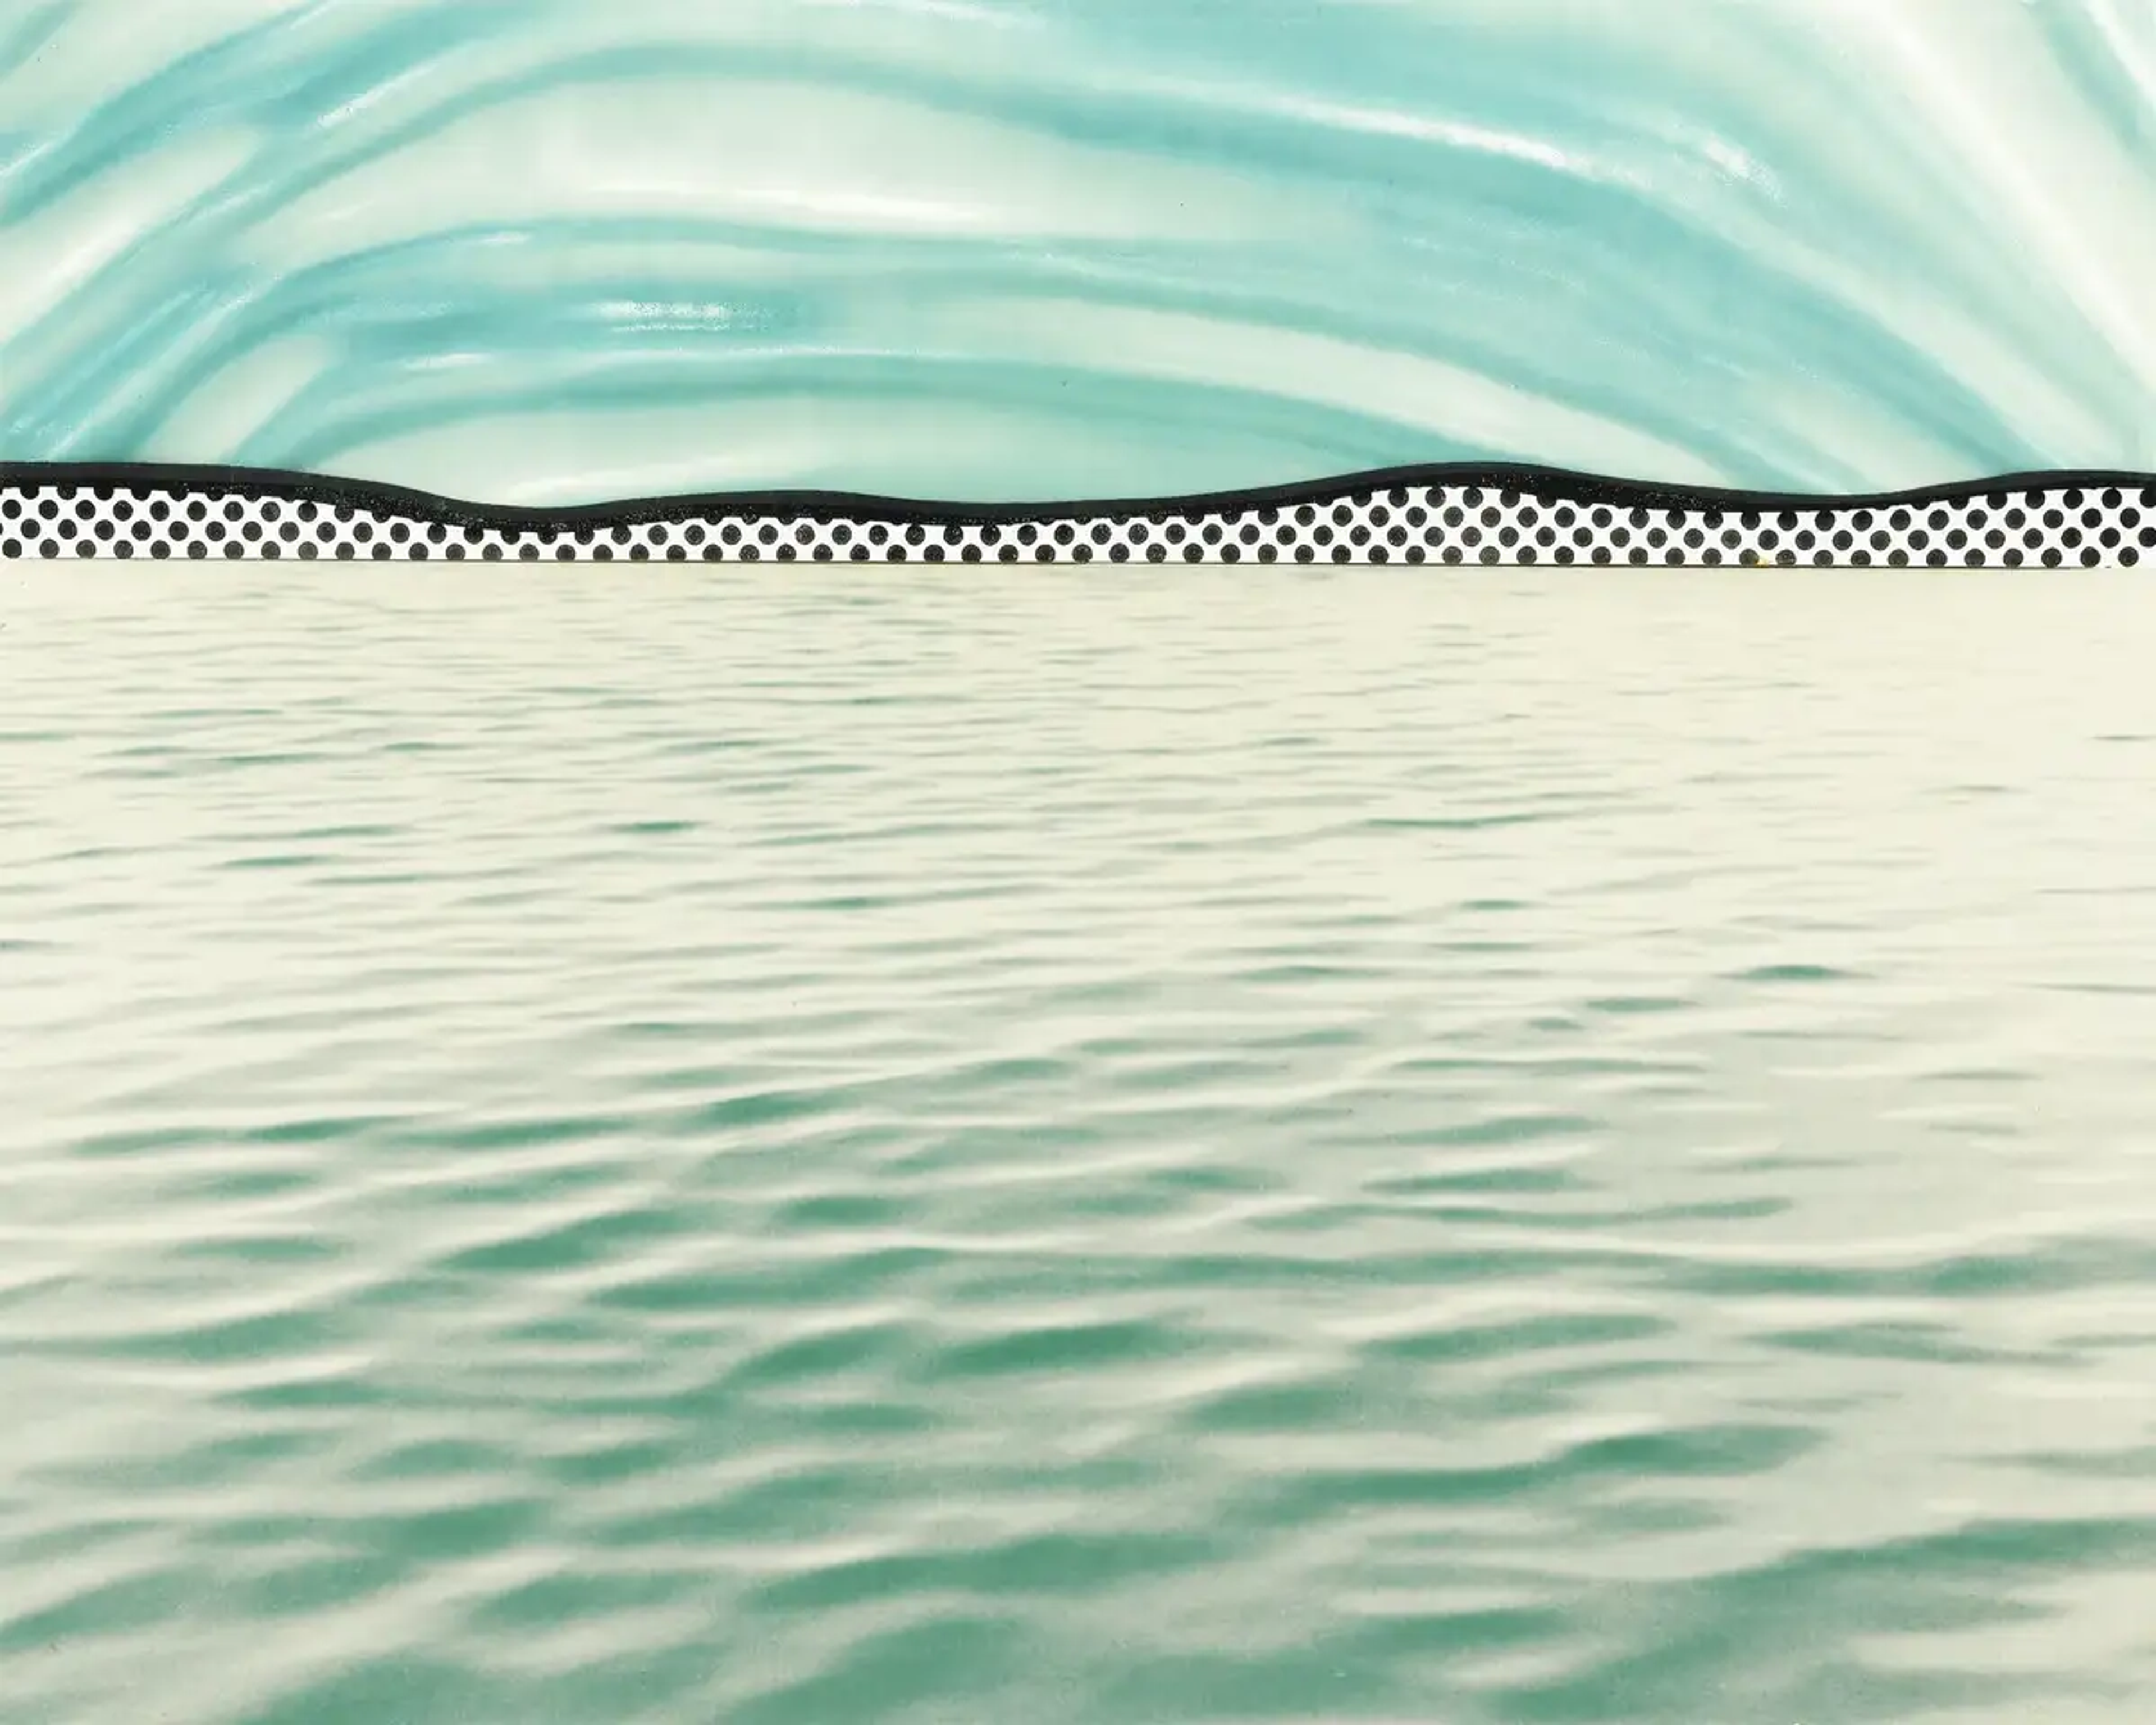 Landscape 6 shows a black and white canvas split in two by a bold horizon line. The upper half captures a pale turquoise swirling sky set against similarly hued rippling water below. Plastic Rowlux sheets are applied in this print to mimic the shimmer of natural light. The synthetic fabric produces prismatic spatial interplays across the work’s surface, invoking a sense of movement.